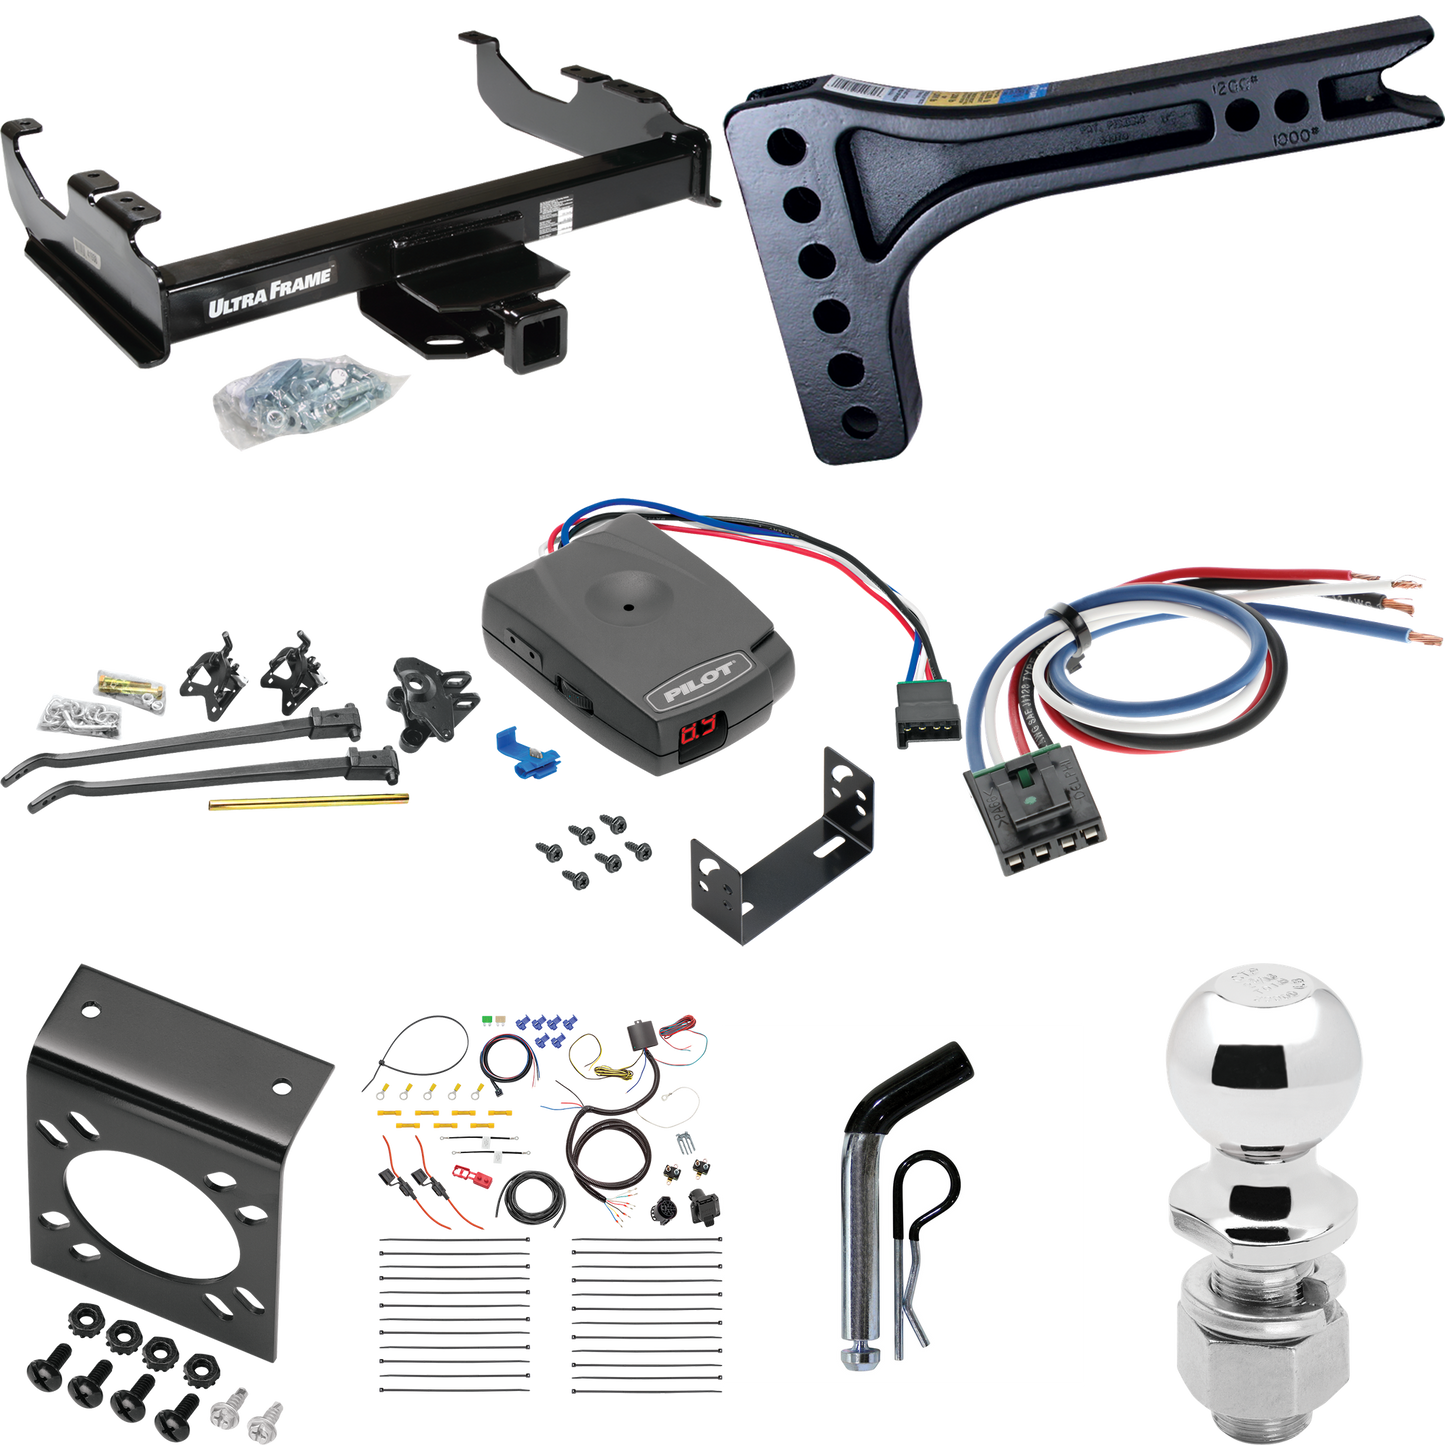 Fits 2007-2014 GMC Sierra 3500 HD Trailer Hitch Tow PKG w/ 15K Trunnion Bar Weight Distribution Hitch + Pin/Clip + 2-5/16" Ball + Pro Series Pilot Brake Control + Generic BC Wiring Adapter + 7-Way RV Wiring (For Cab & Chassis, w/34" Wide Frames Model